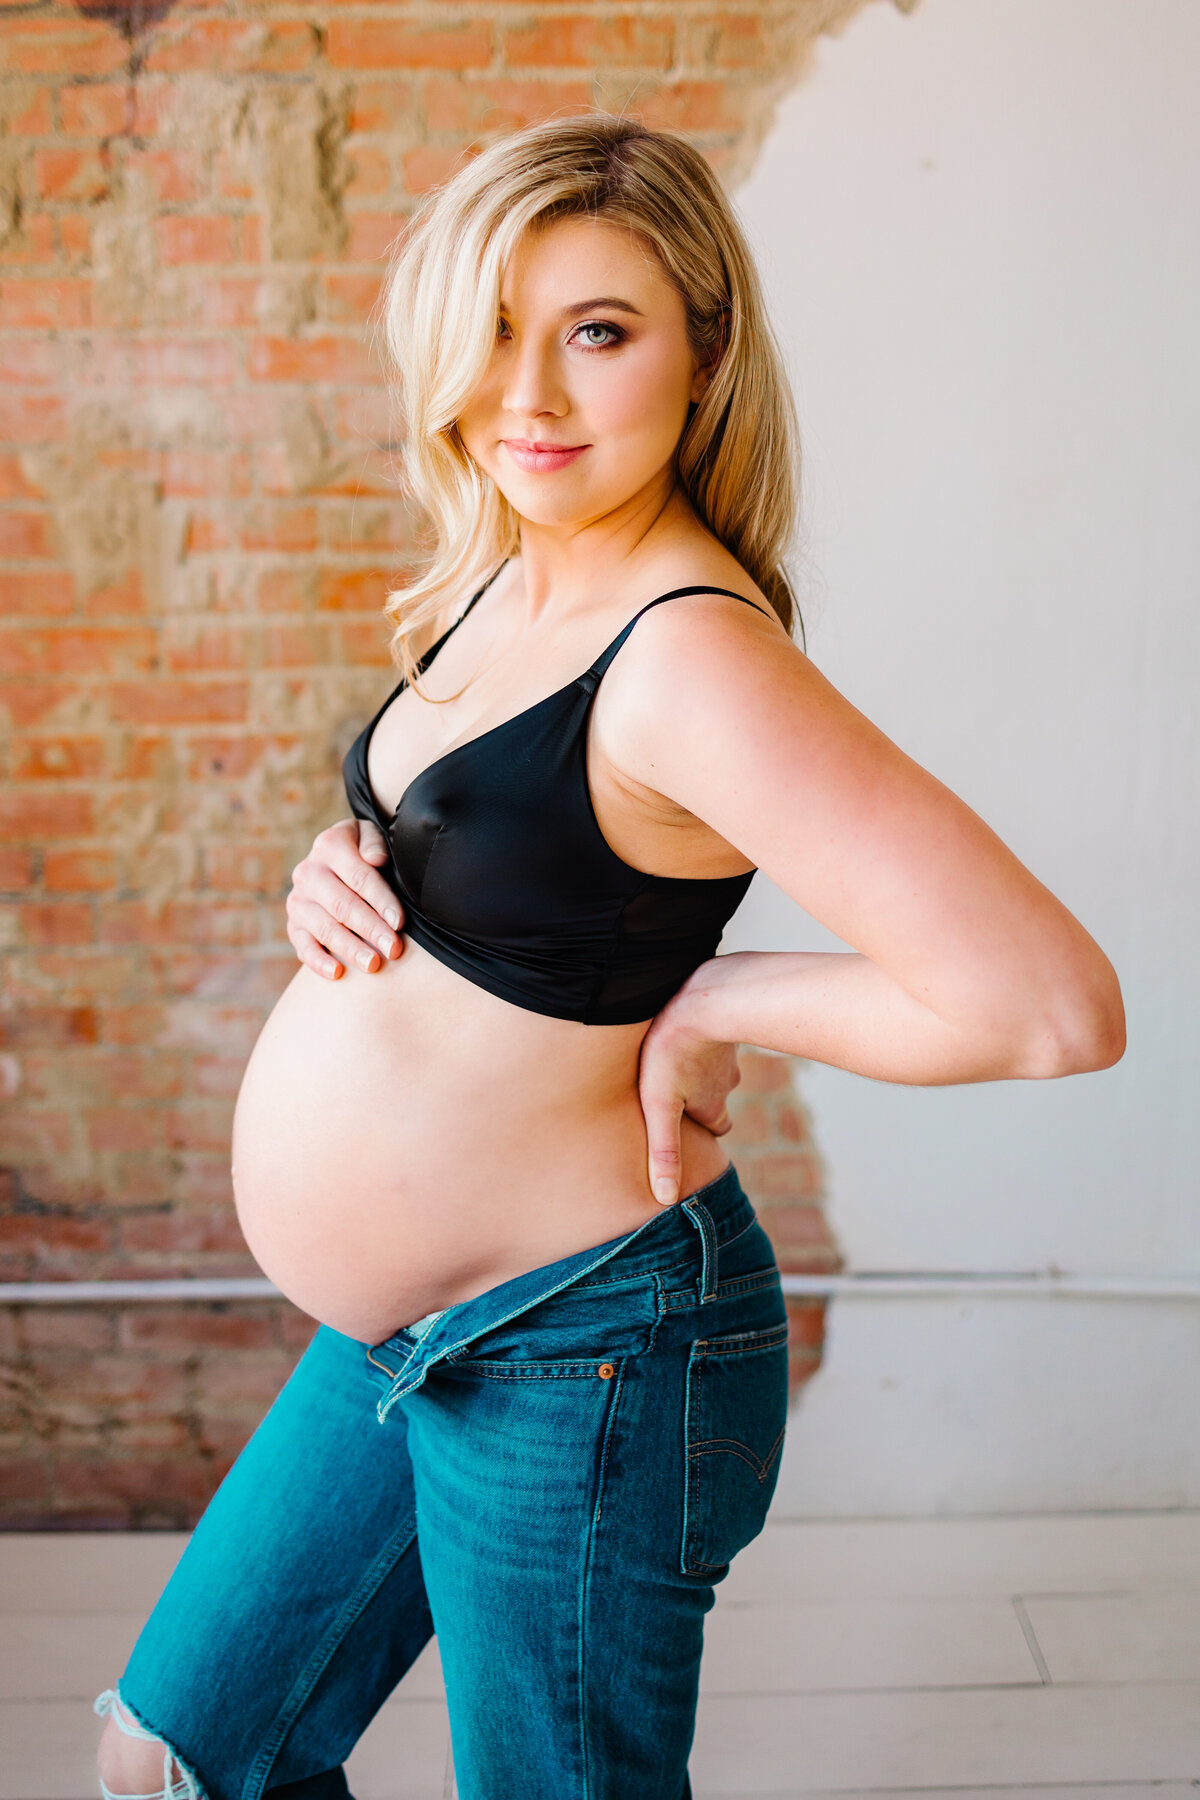 A stunning maternity photo of a pregnant woman with blonde hair, dressed in a chic black bralette and blue jeans. Captured in an Albuquerque photography studio, the image highlights her glowing pregnancy and stylish outfit against a clean and professional studio backdrop.